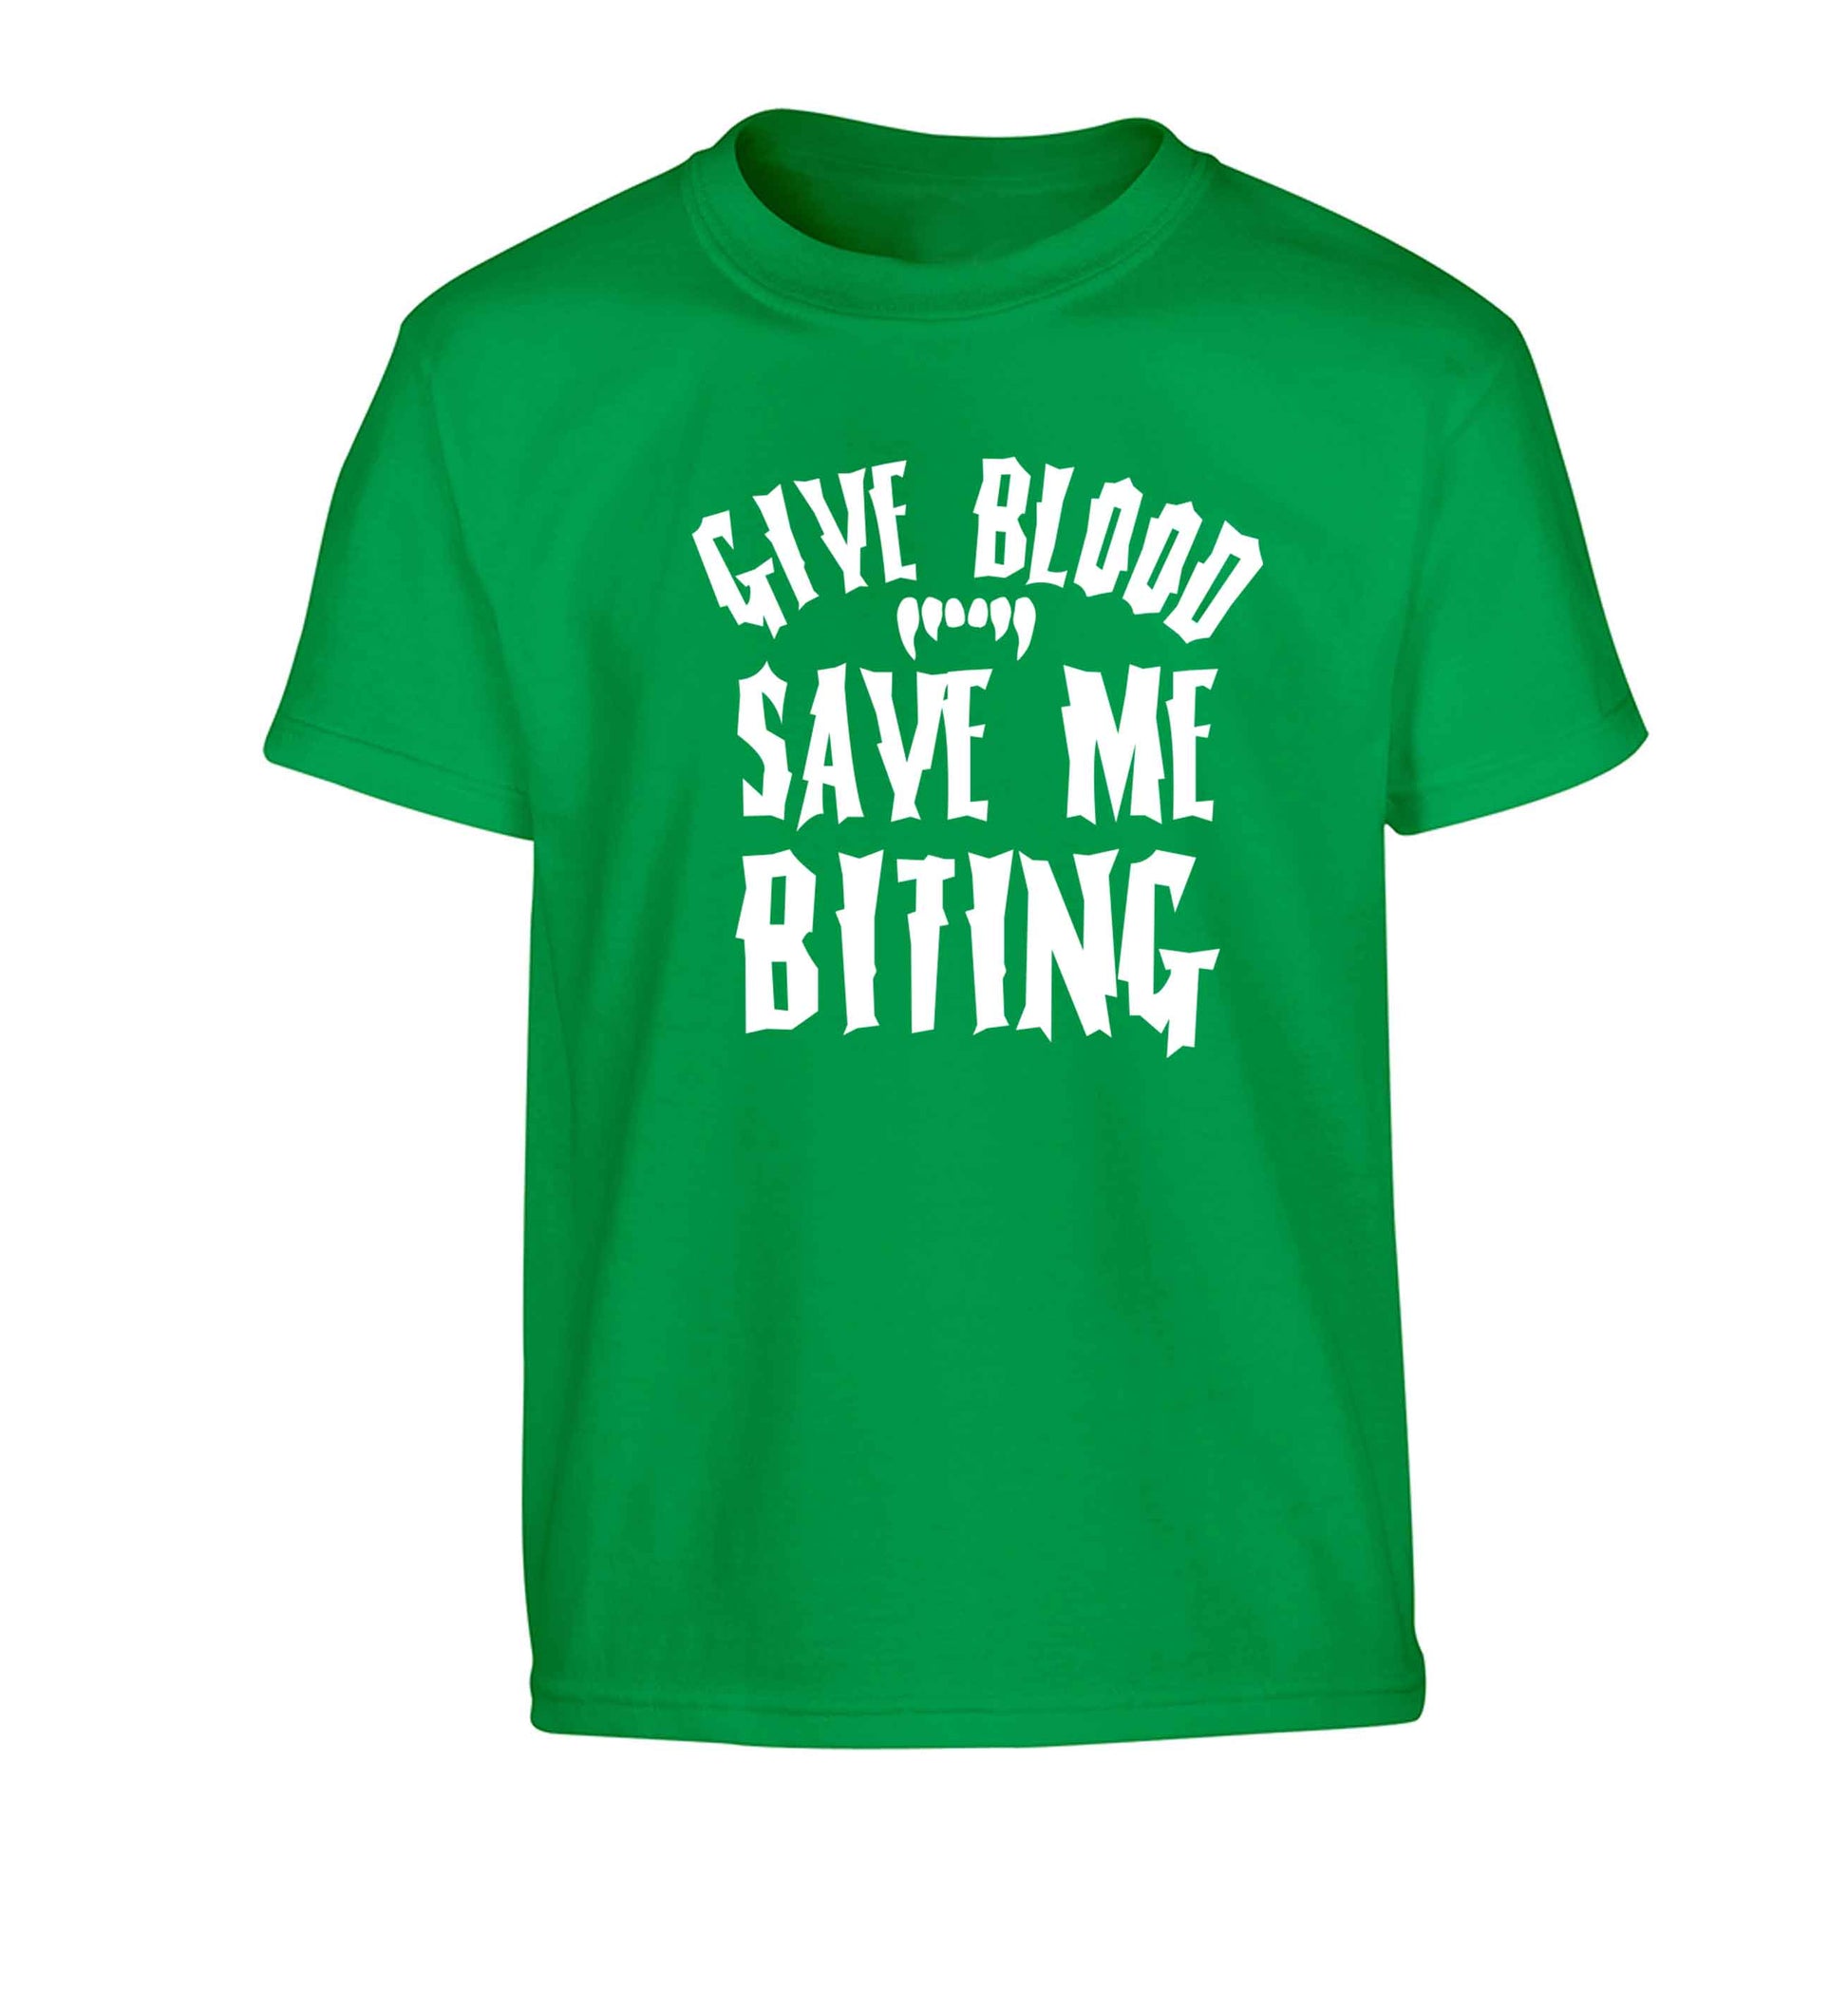 Give blood save me biting Children's green Tshirt 12-13 Years